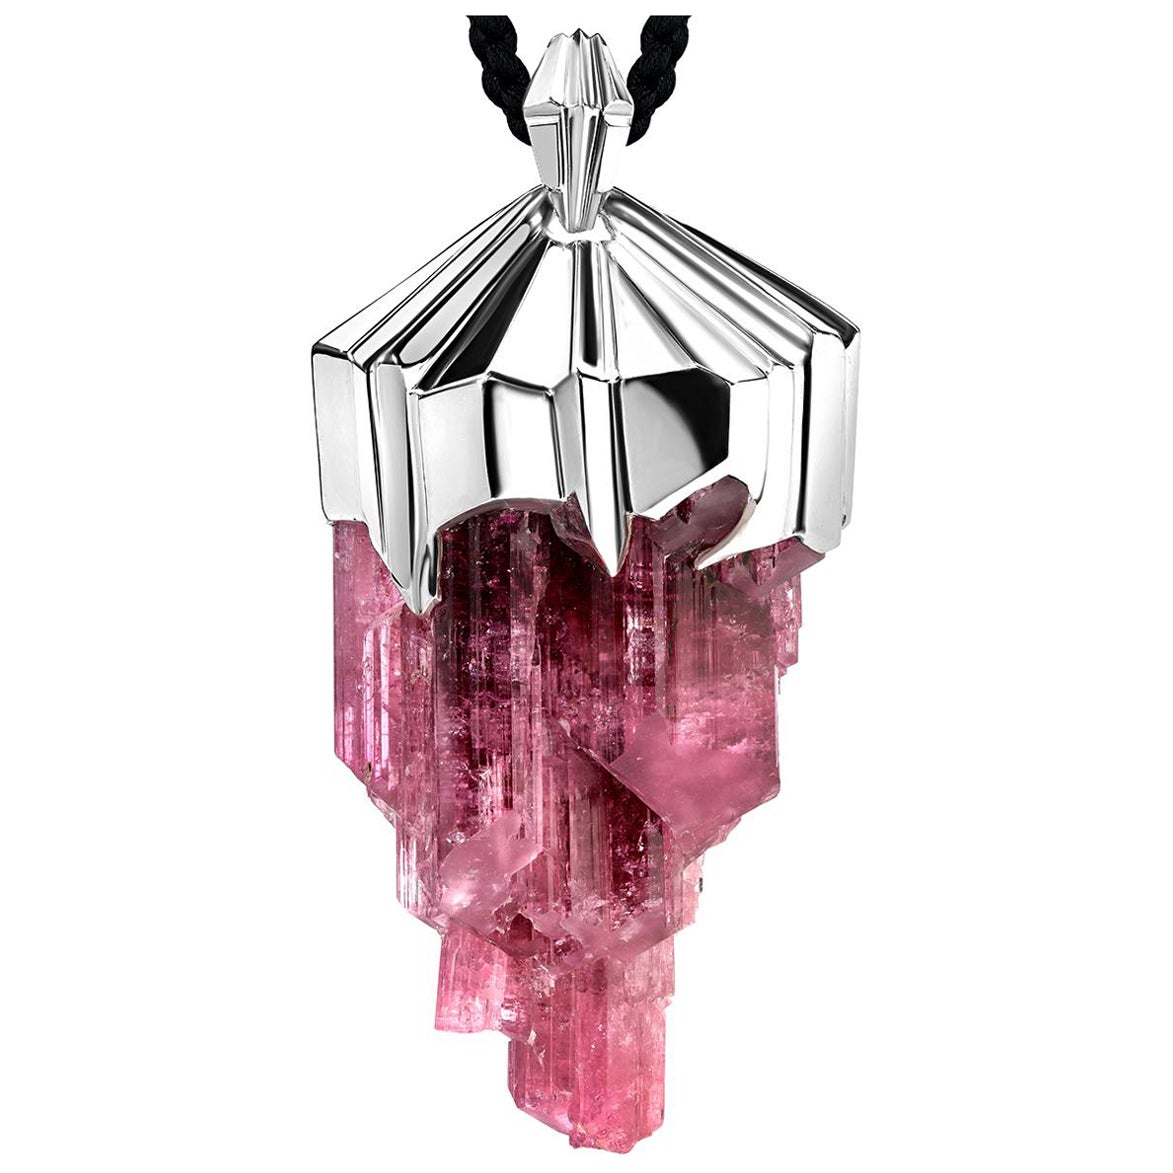 Large Rubellite Tourmaline Crysral Raw Silver necklace Wedding gift